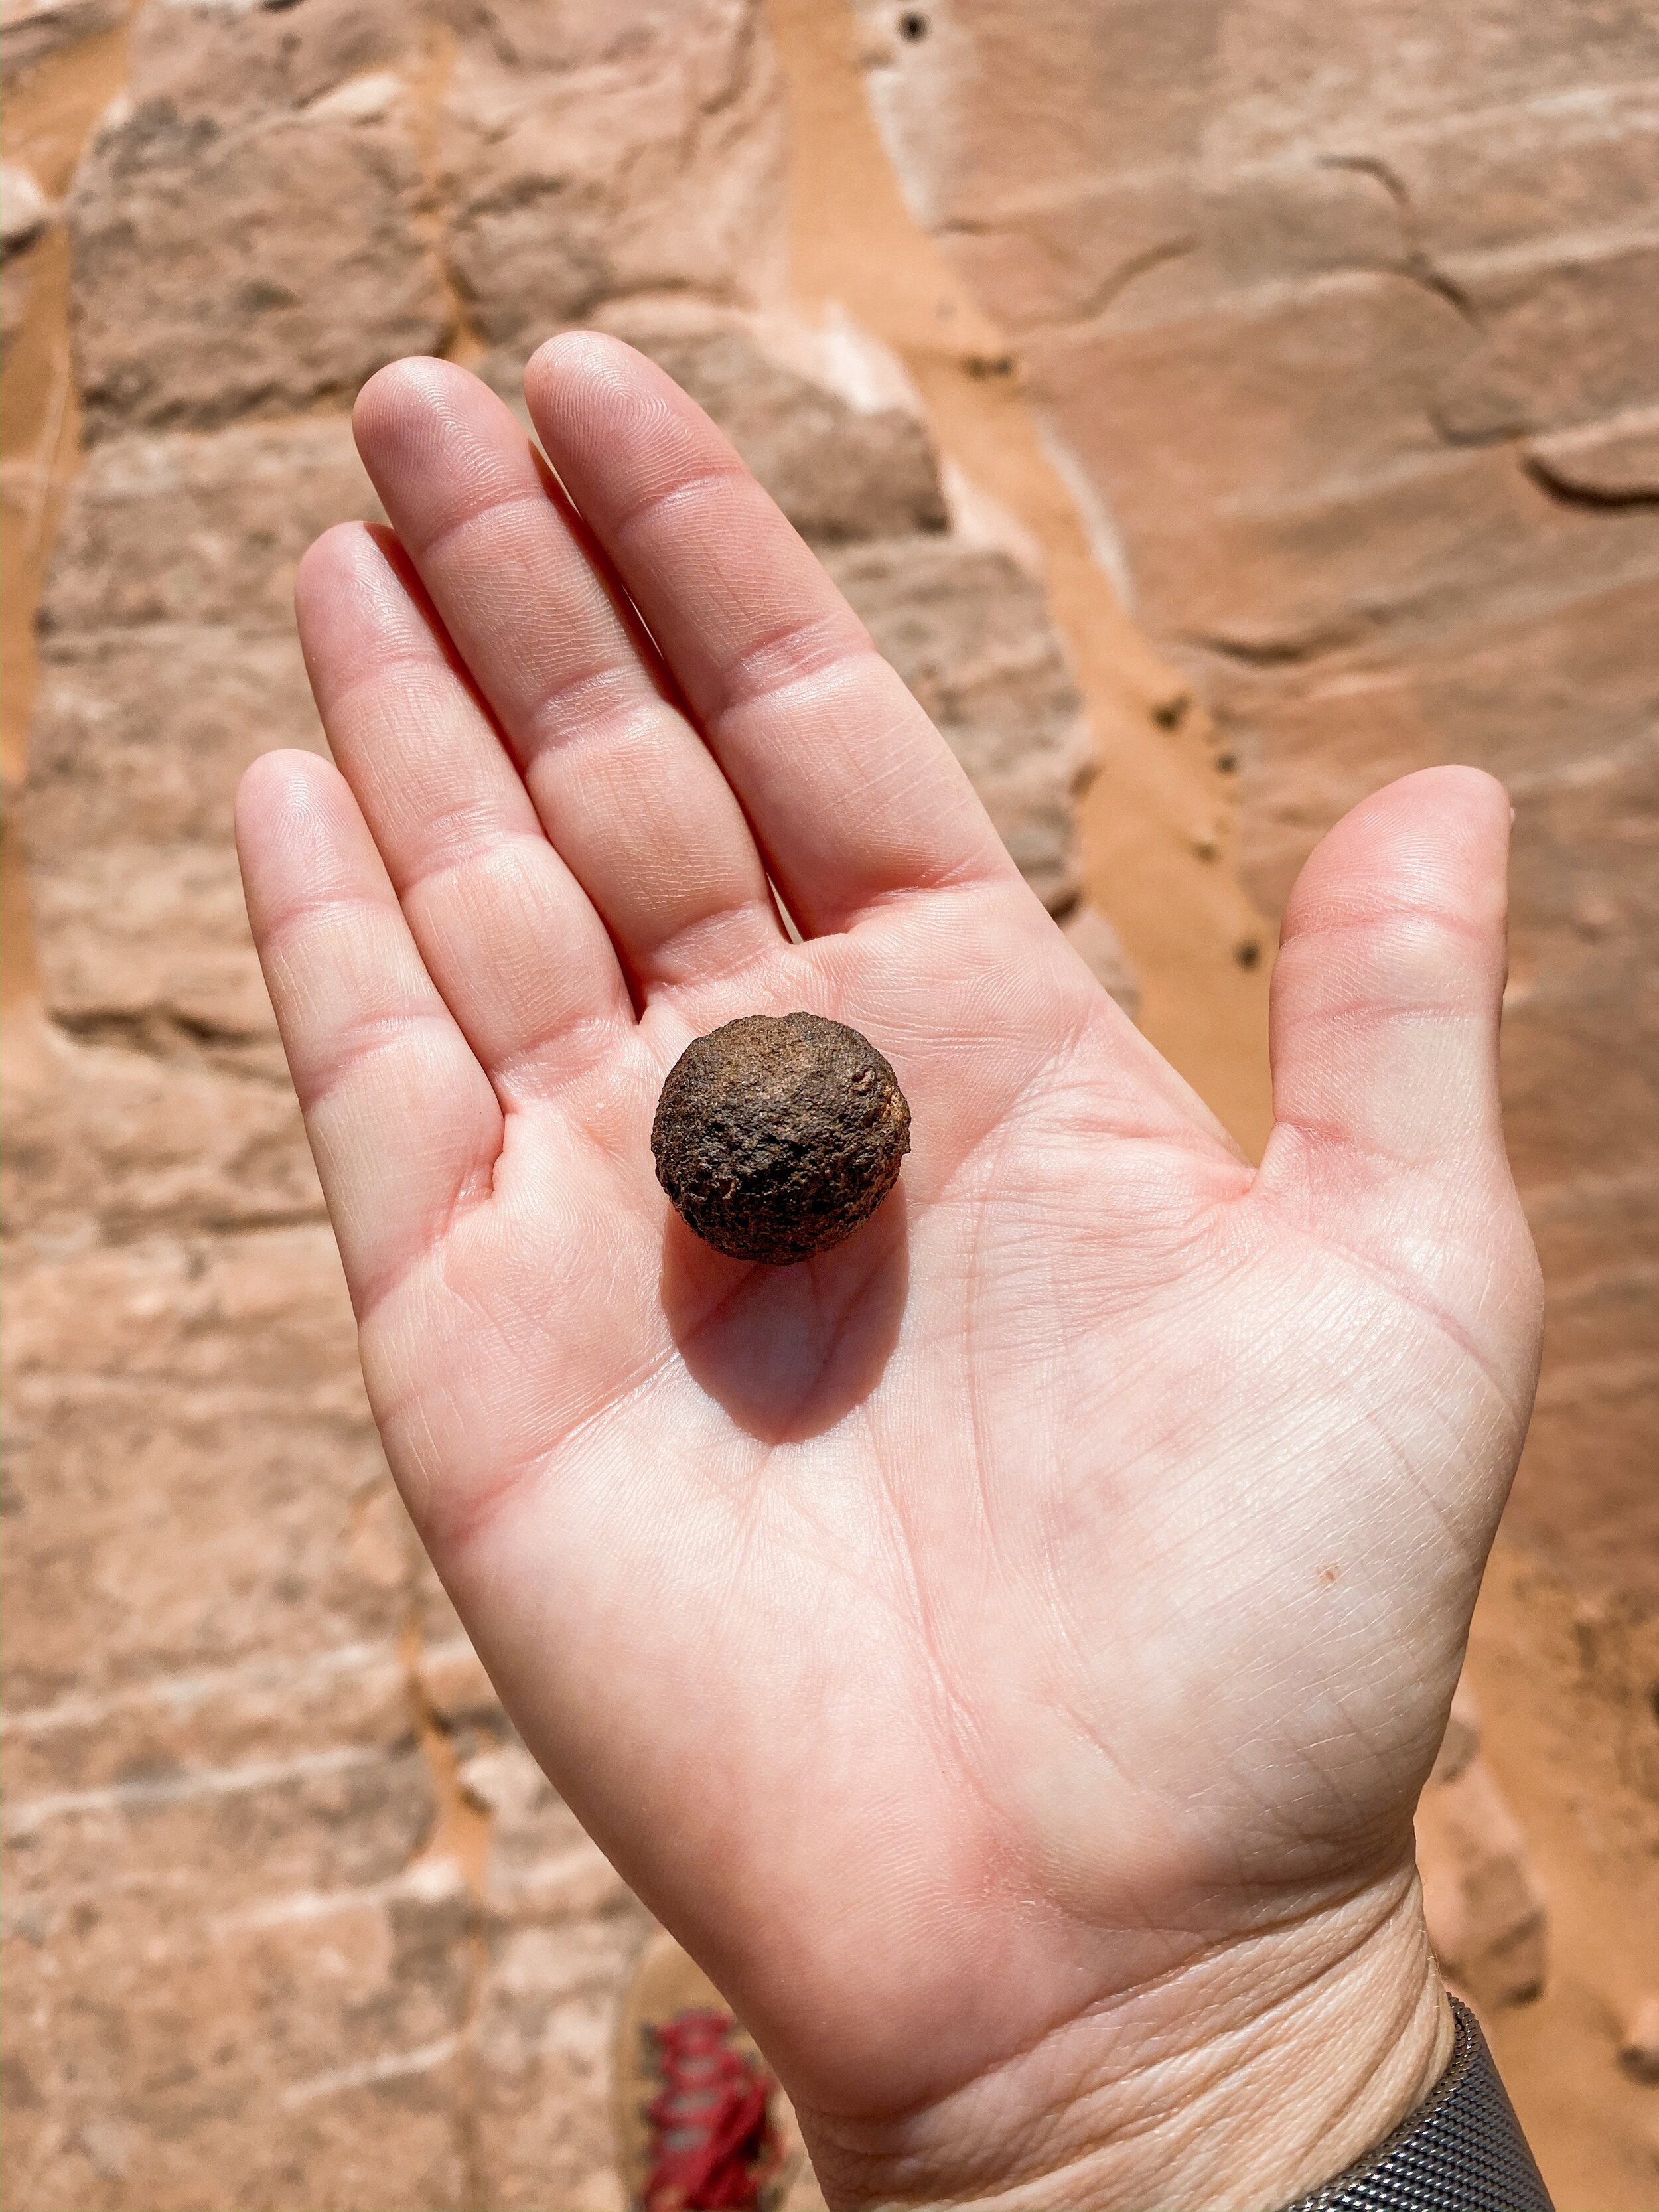 One of the thousand Moqui Balls found in a moqui ball field in Grand Staircase Escalante National Monument, Utah